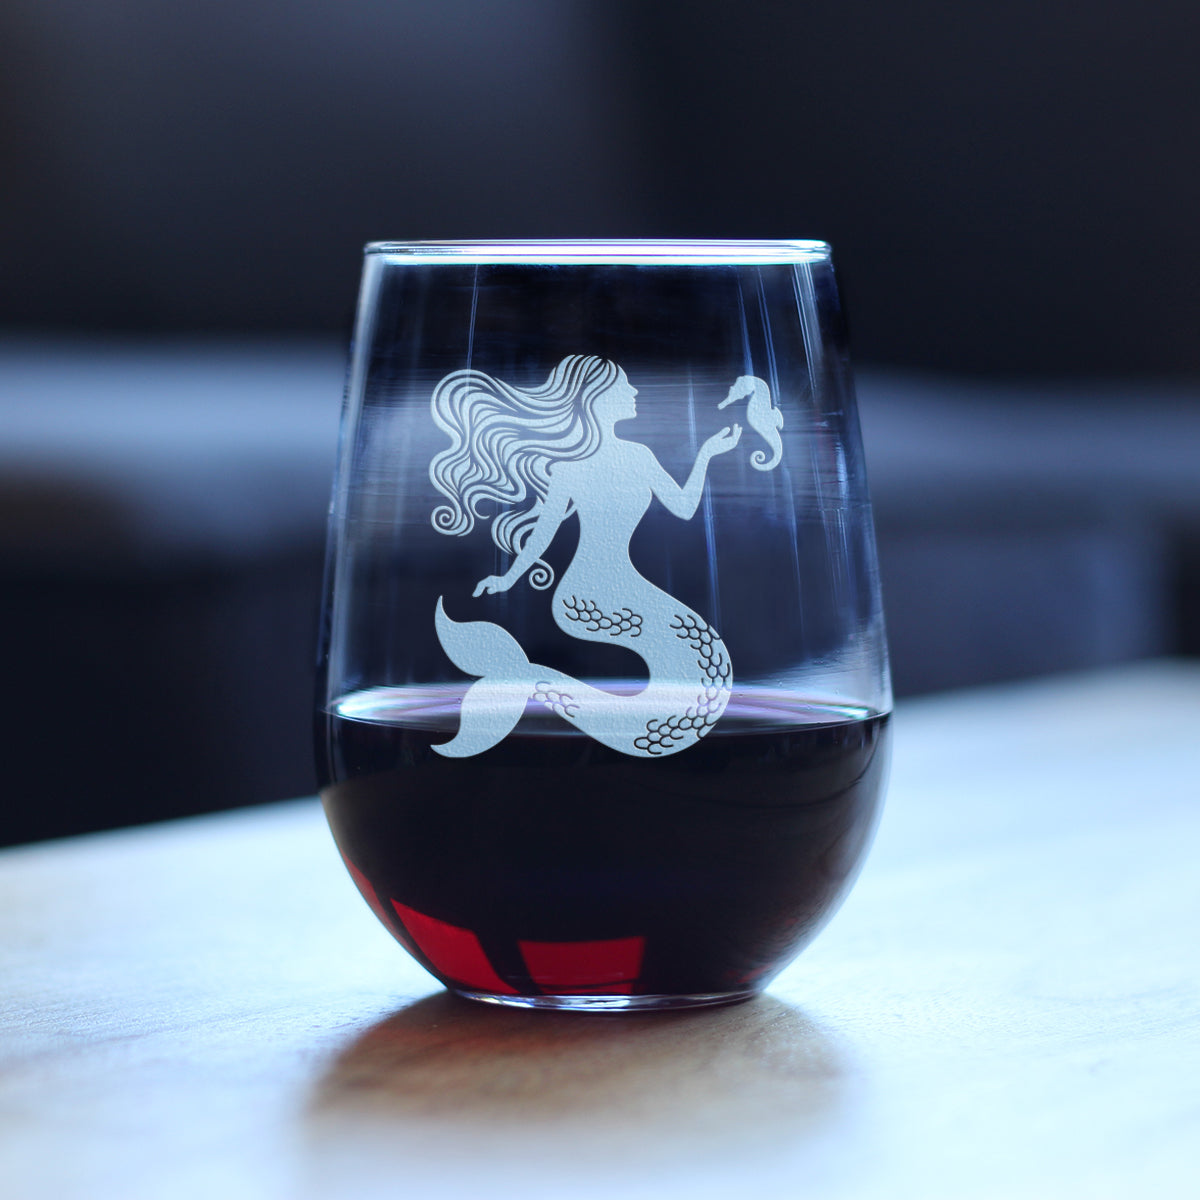 Mermaid Stemless Wine Glass - Fun Mermaids Themed Decor and Gifts for Beach Lovers - Large 17 Oz Glasses